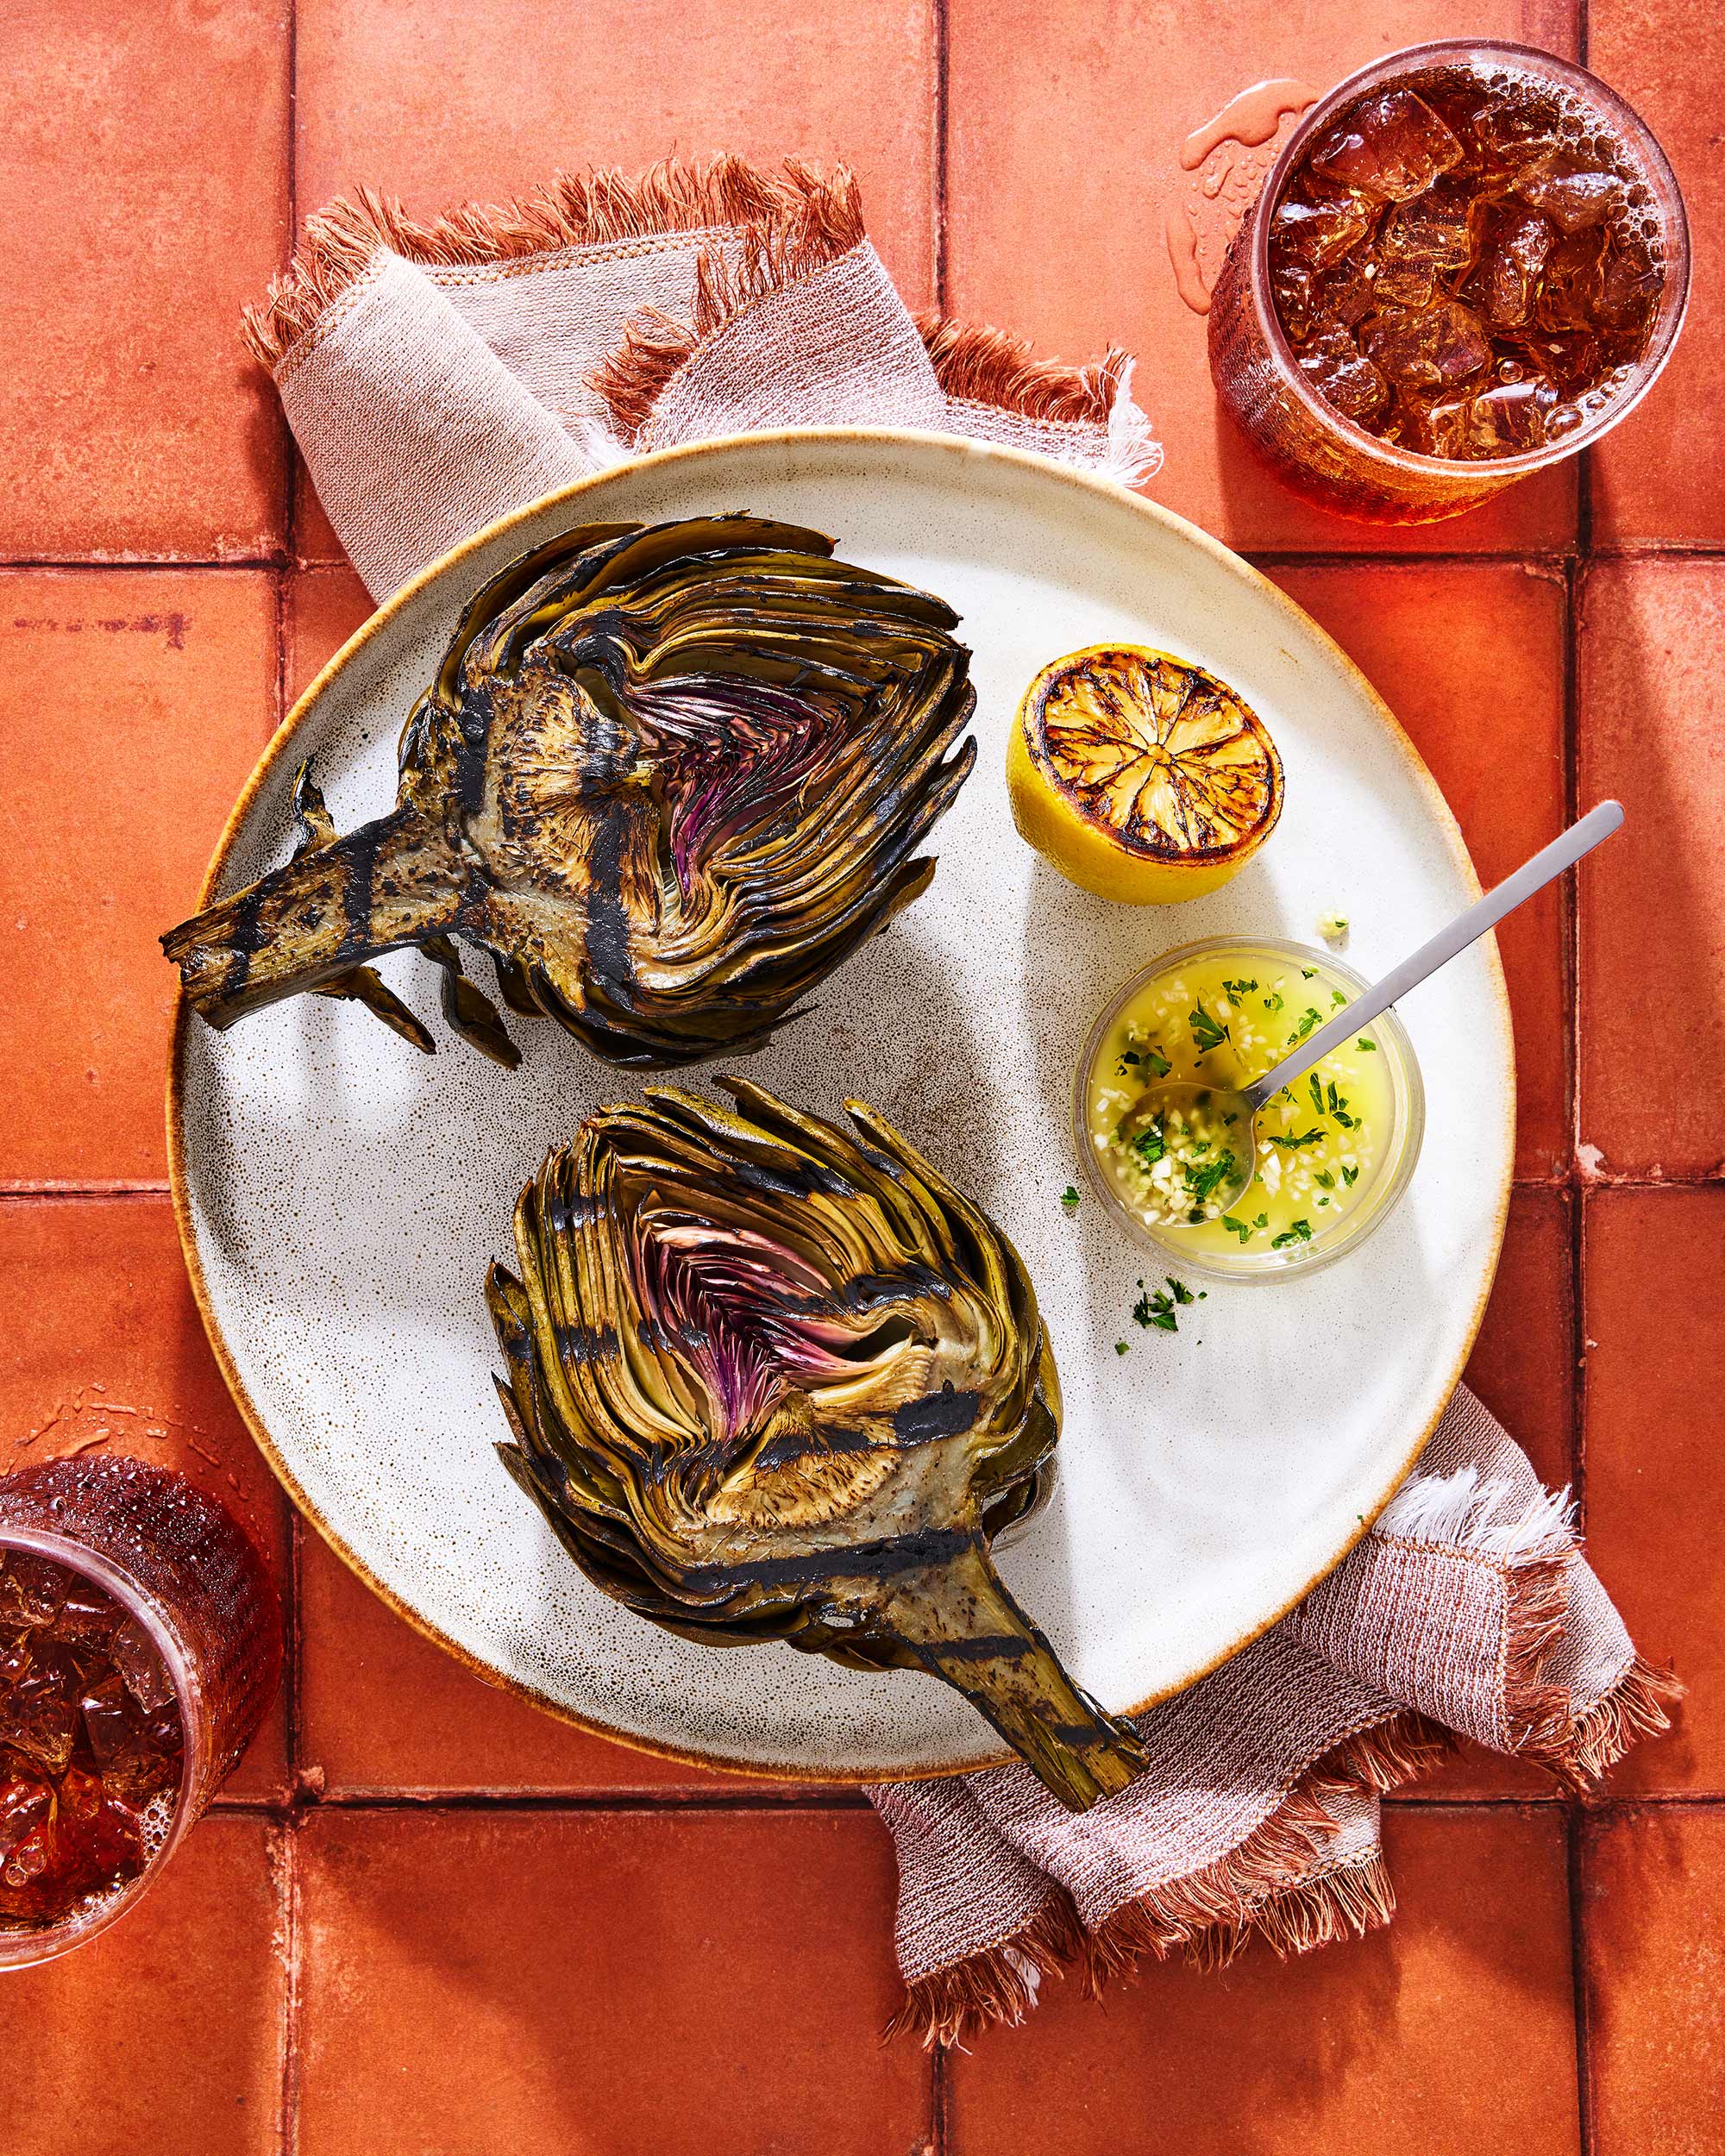 Glanger Food Photography | Grilled Artichokes with lemon, garlic butter dipping sauce and iced teas 